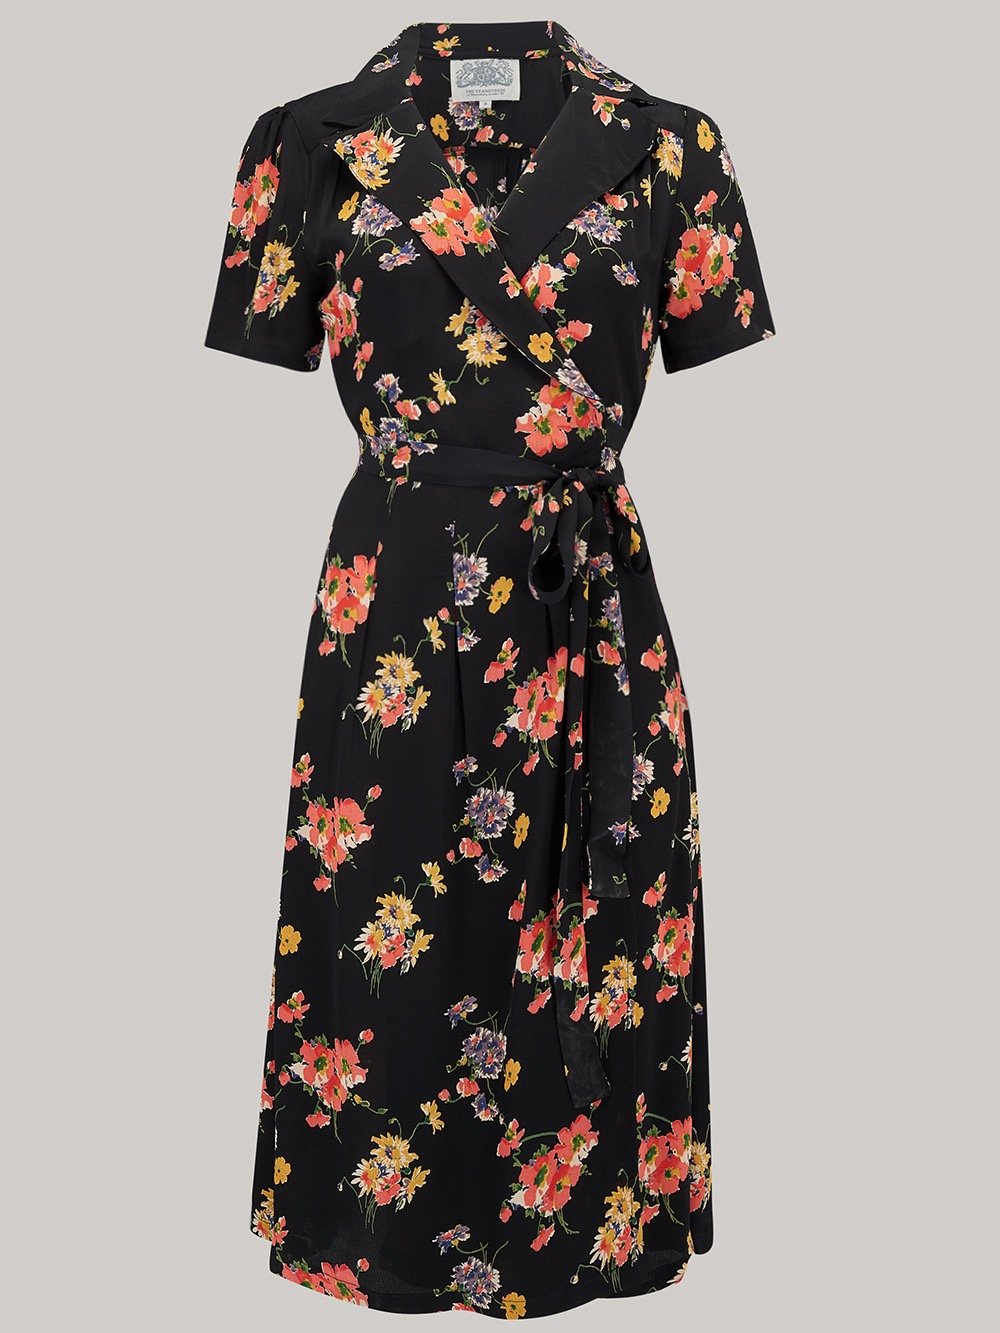 "Peggy" Wrap Dress in Black with Mayflower Print, Classic 1940s Vintage Inspired - True and authentic vintage style clothing, inspired by the Classic styles of CC41 , WW2 and the fun 1950s RocknRoll era, for everyday wear plus events like Goodwood Revival, Twinwood Festival and Viva Las Vegas Rockabilly Weekend Rock n Romance The Seamstress of Bloomsbury